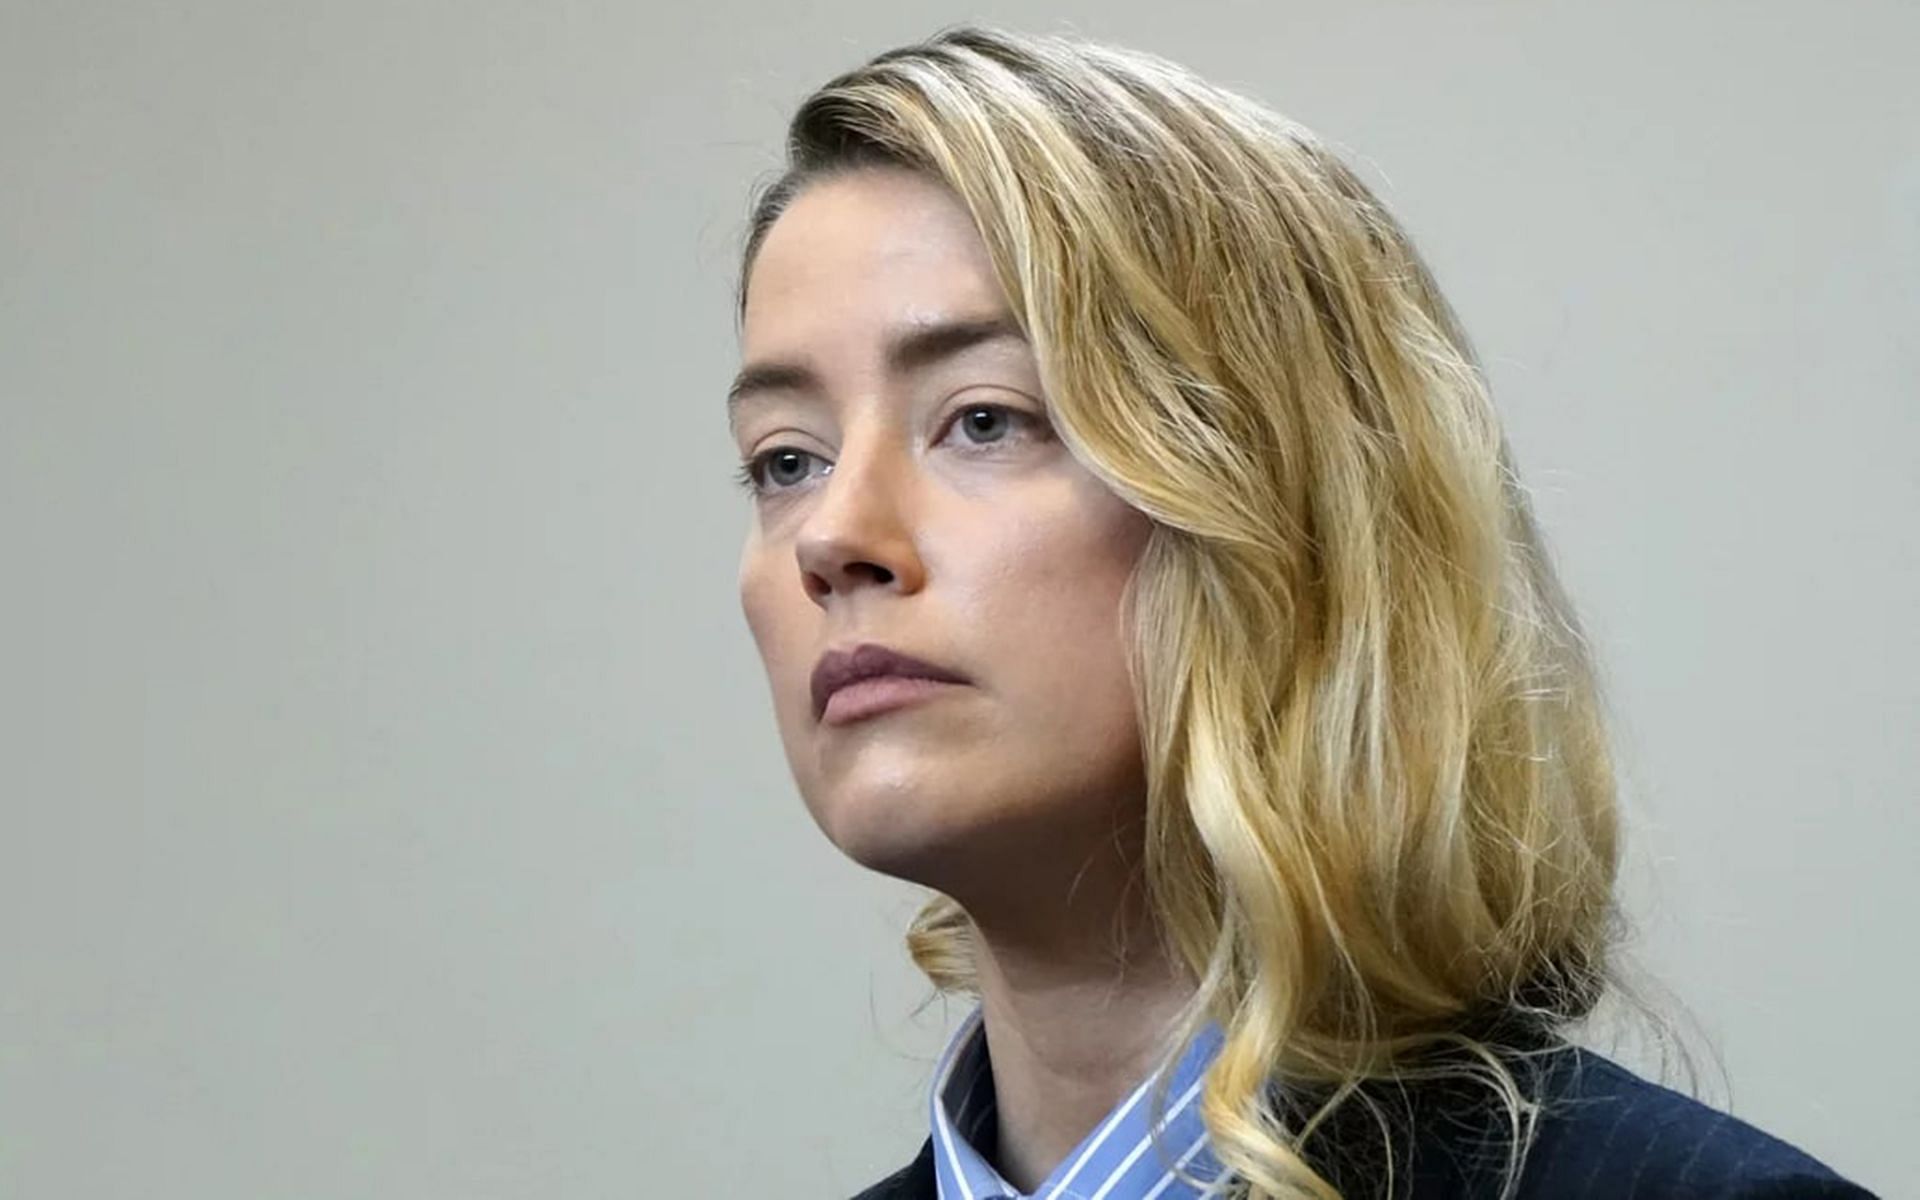 Video of Amber Heard partying after receiving divorce settlement goes viral on social media (Image via Getty)